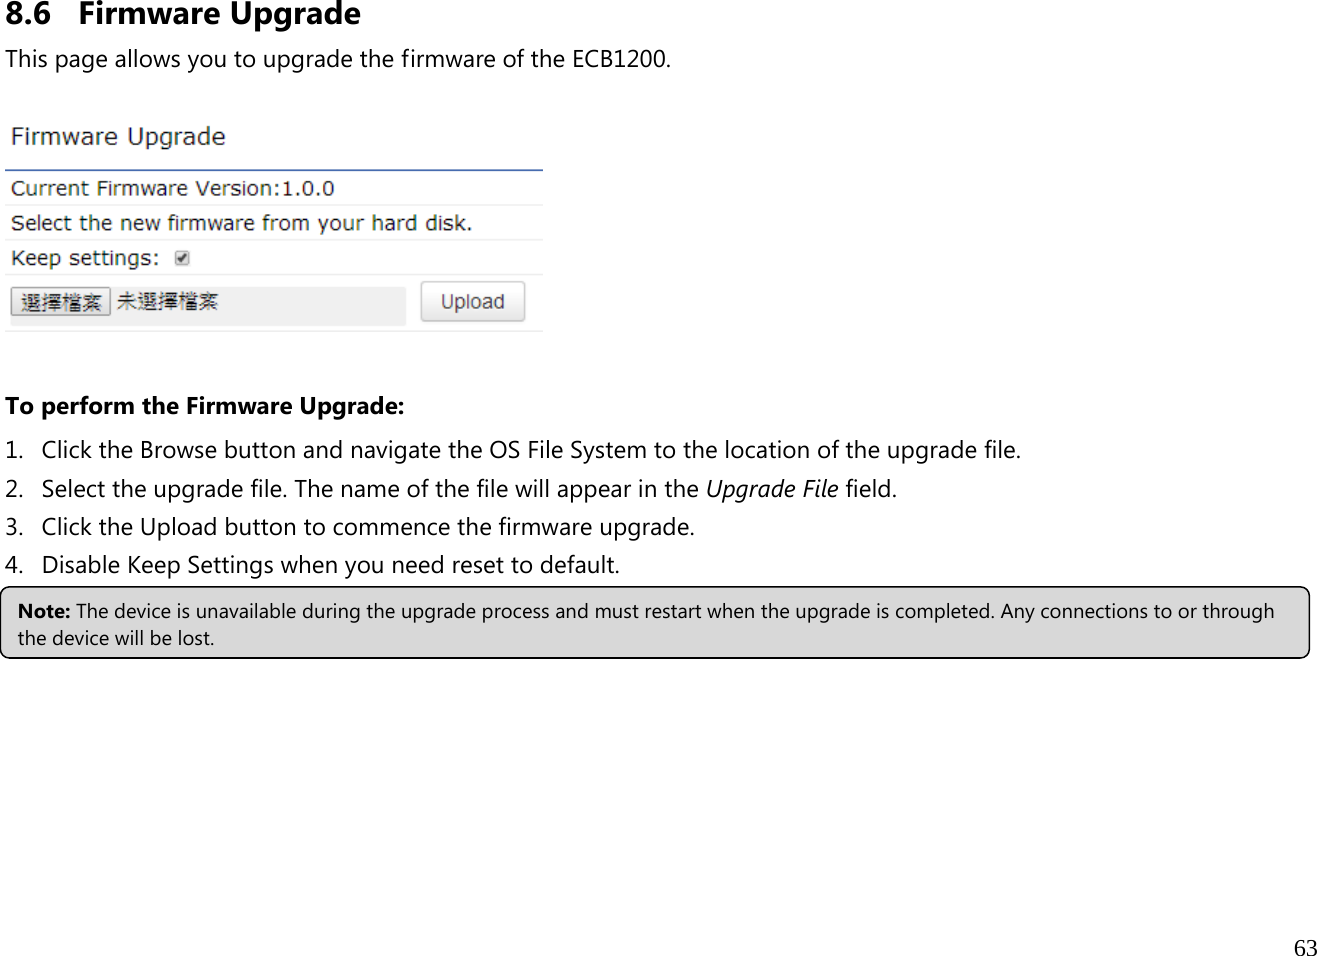  63  8.6 Firmware Upgrade This page allows you to upgrade the firmware of the ECB1200.    To perform the Firmware Upgrade: 1. Click the Browse button and navigate the OS File System to the location of the upgrade file. 2. Select the upgrade file. The name of the file will appear in the Upgrade File field. 3. Click the Upload button to commence the firmware upgrade. 4. Disable Keep Settings when you need reset to default.    Note: The device is unavailable during the upgrade process and must restart when the upgrade is completed. Any connections to or through the device will be lost. 